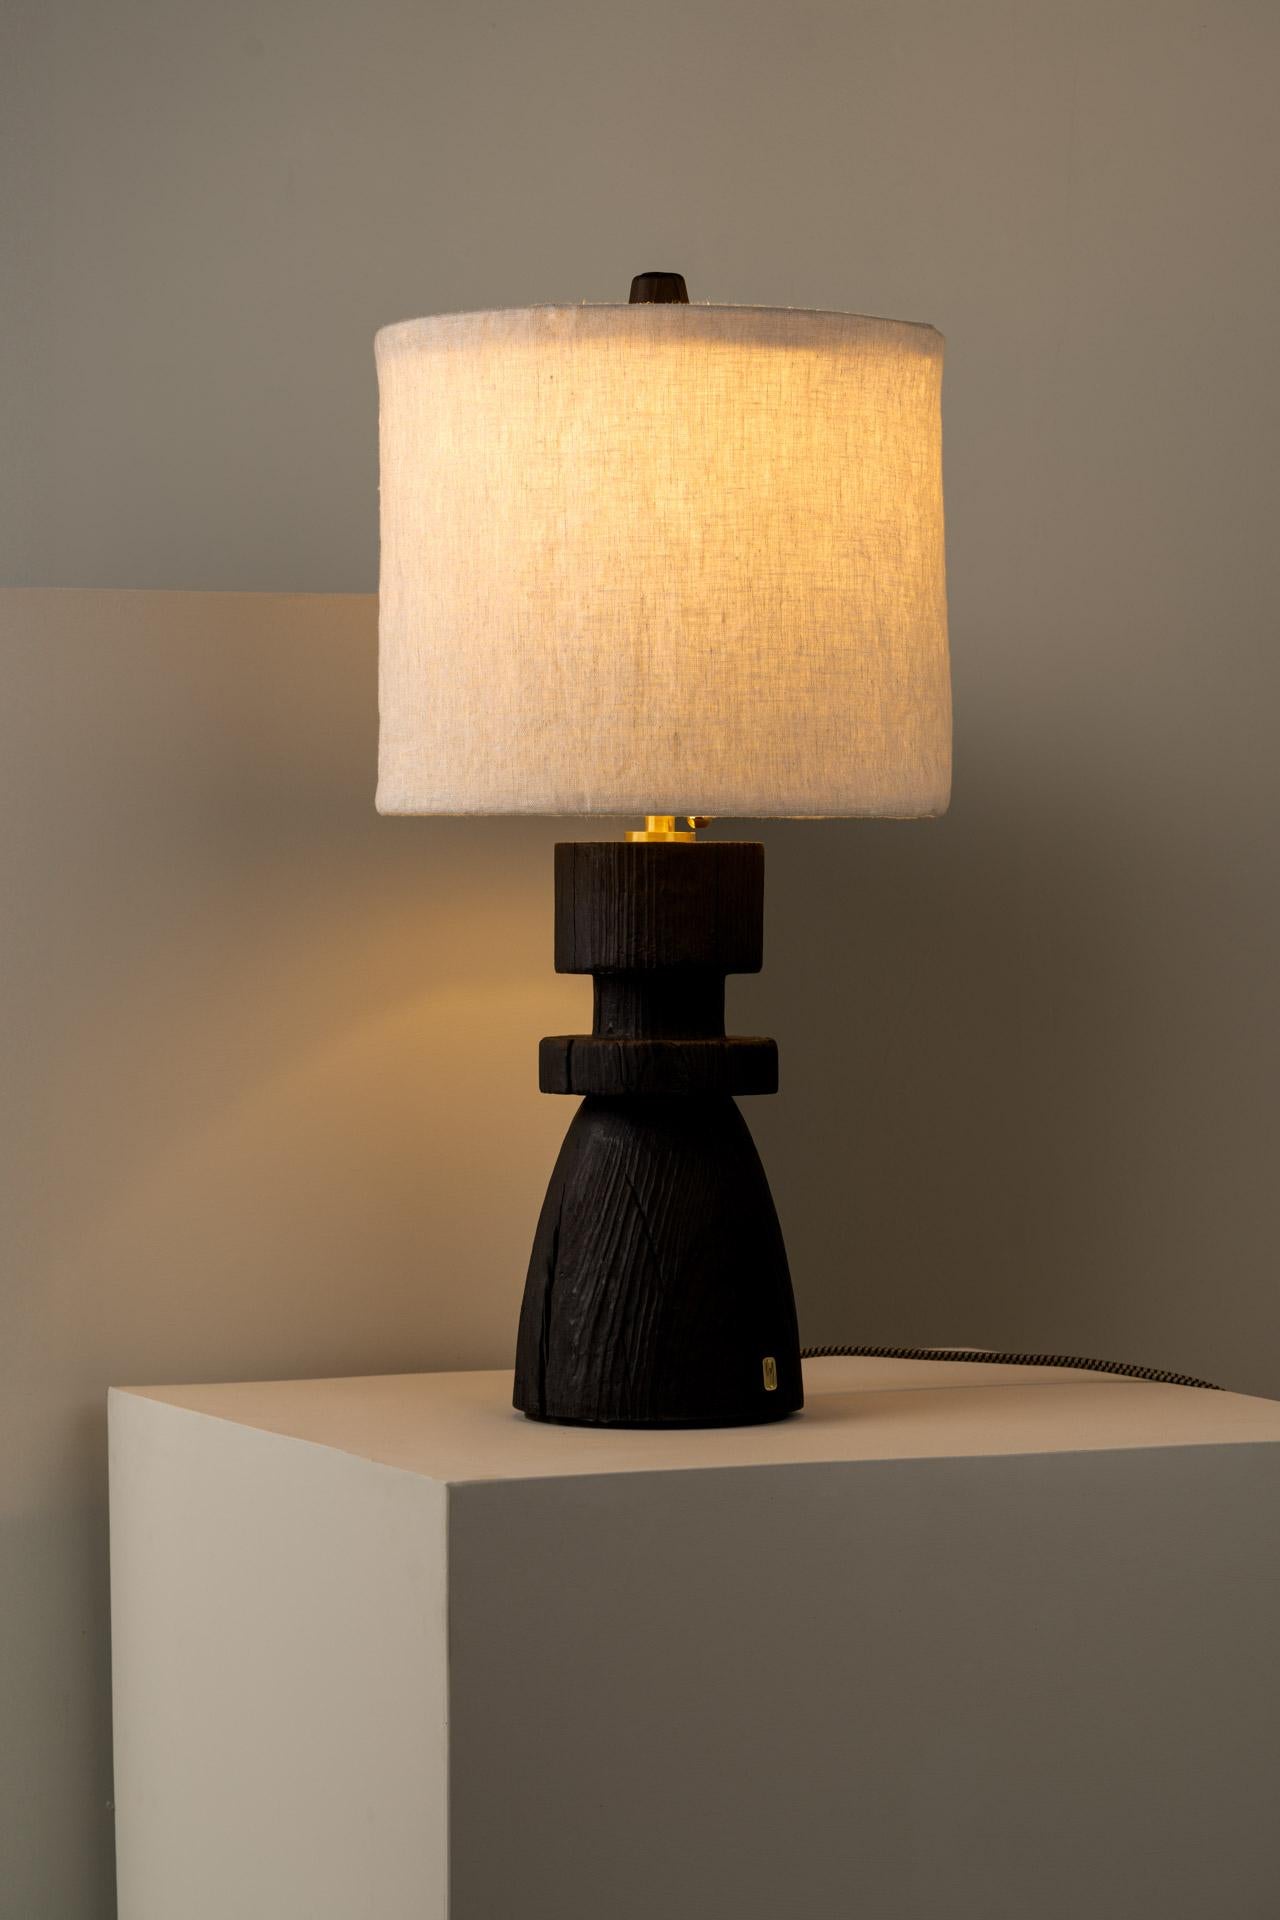 MEZQUITE table lamp was designed for the De Palo collection by Mexican artist Isabel Moncada.

When burnt using the Japanese technique Shou sugi ban, the wood grains become apparent and the cracks randomly appear in the solid trunk. Mezquite's